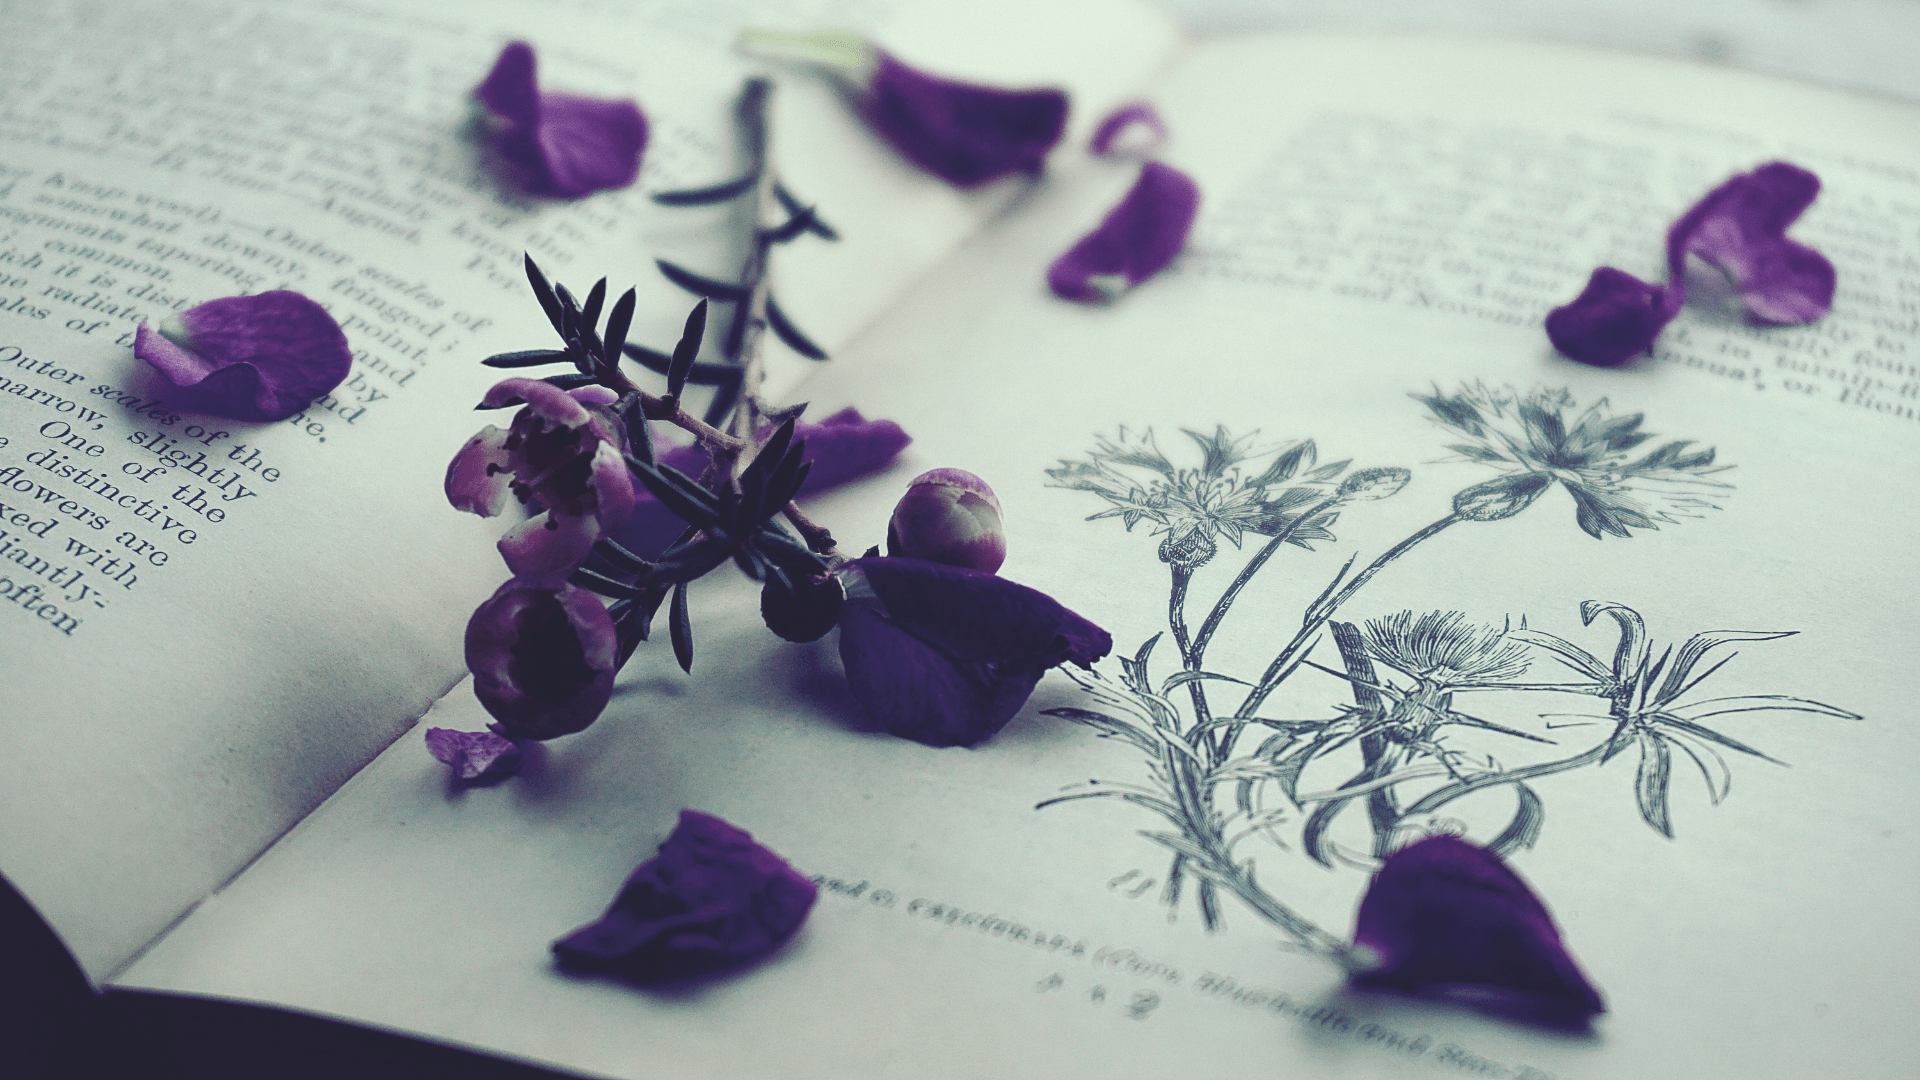 A book with some flowers on it - Purple